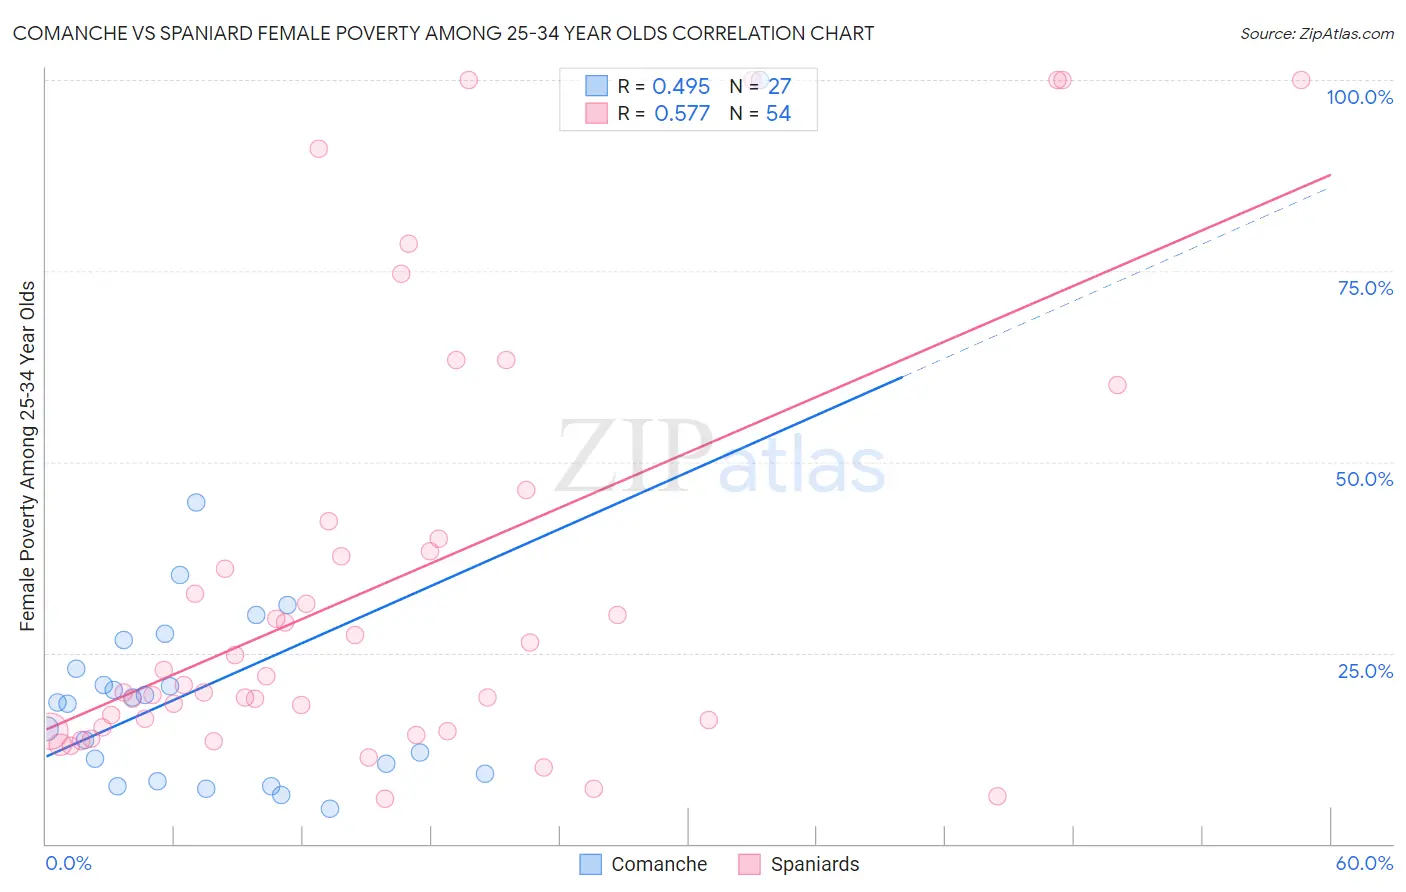 Comanche vs Spaniard Female Poverty Among 25-34 Year Olds